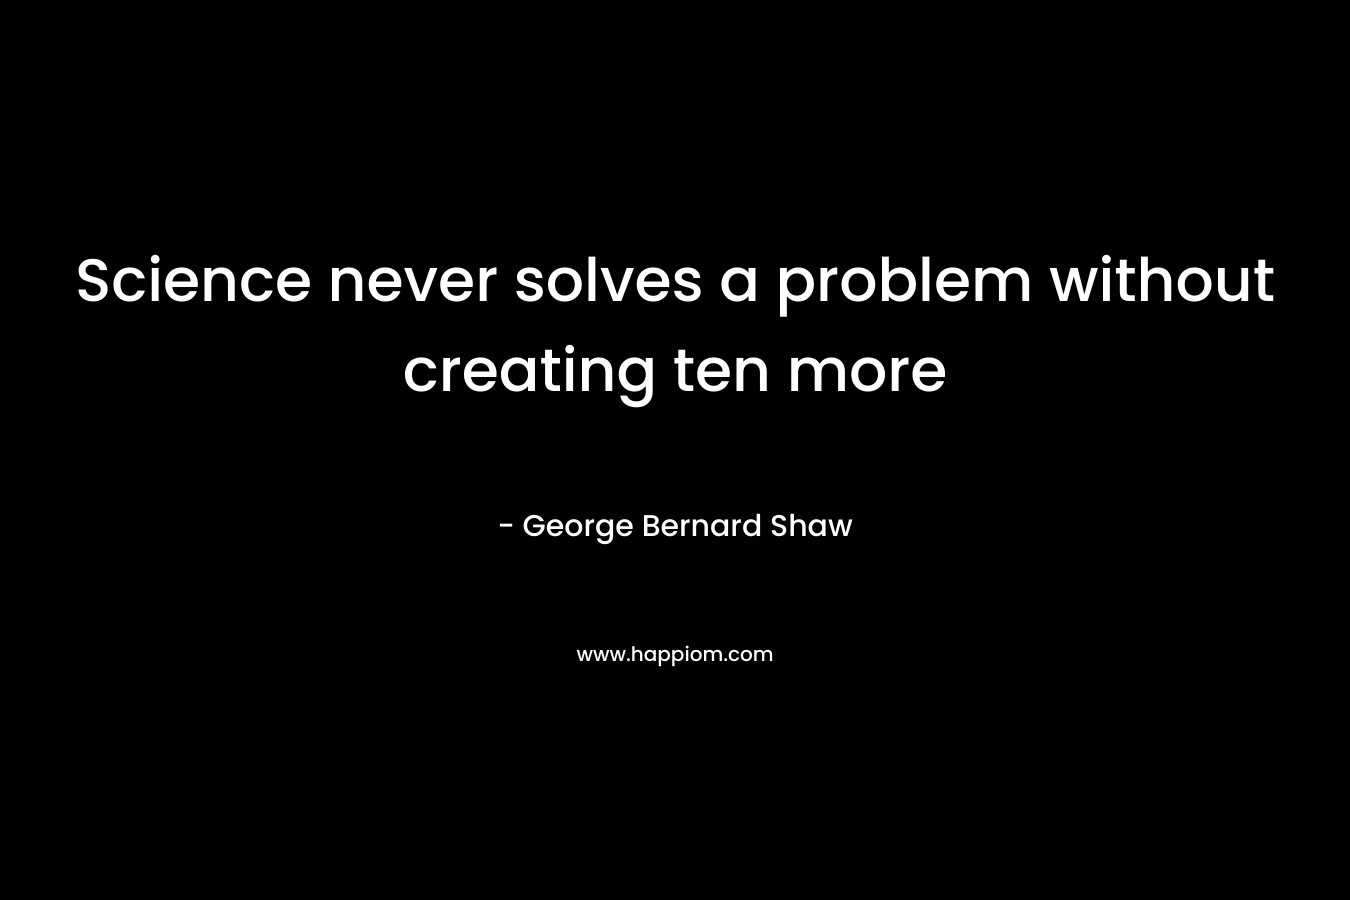 Science never solves a problem without creating ten more